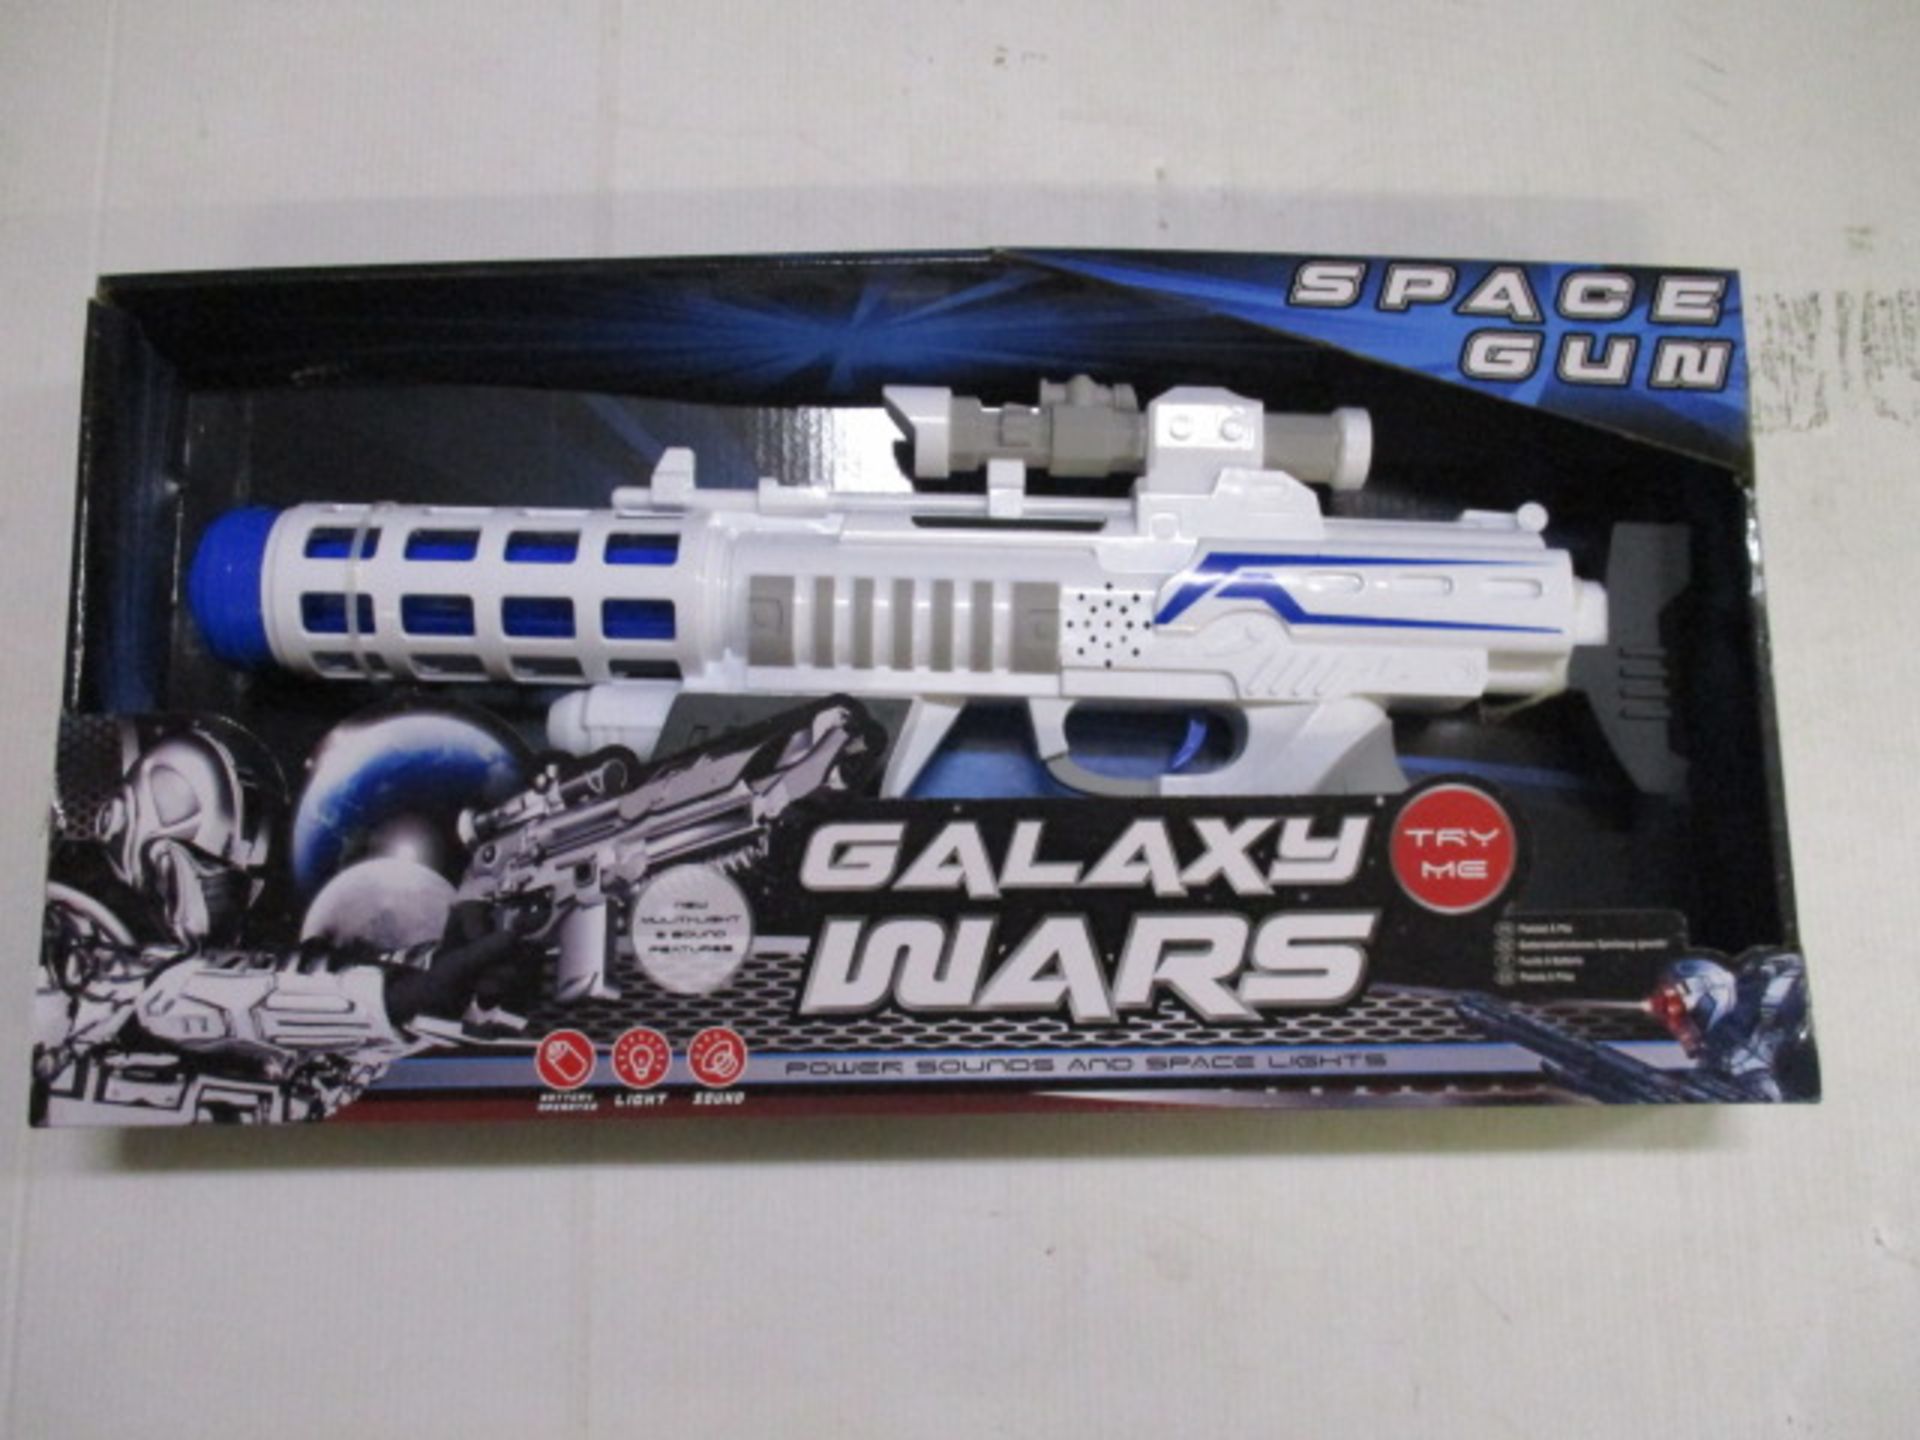 New and sealed Galaxy war space gun with sounds and lights